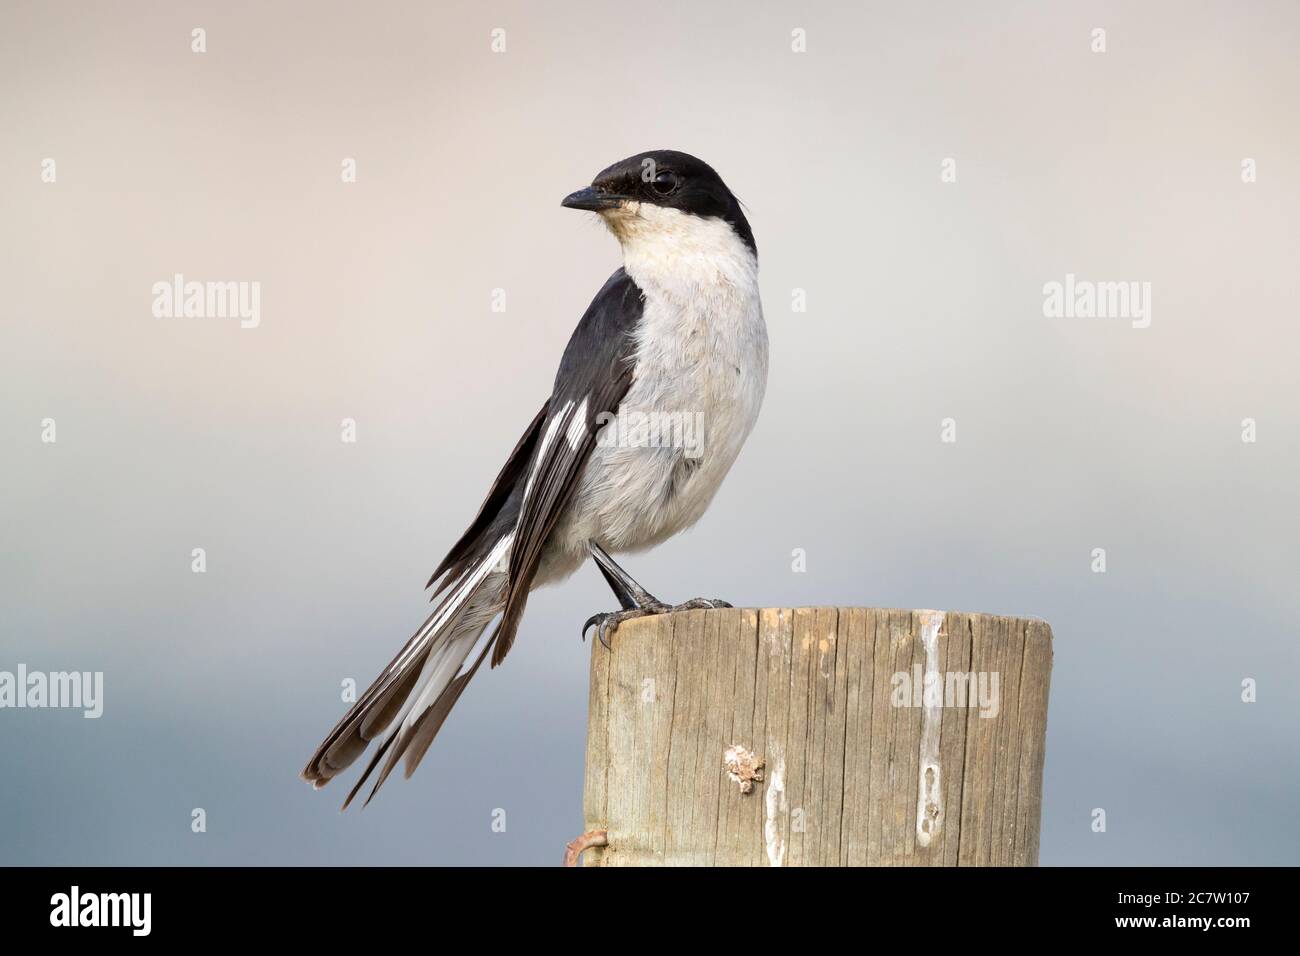 Fiscal Flycatcher (Melaenornis silens), adult male standing on a post, Western Cape, South Africa Stock Photo